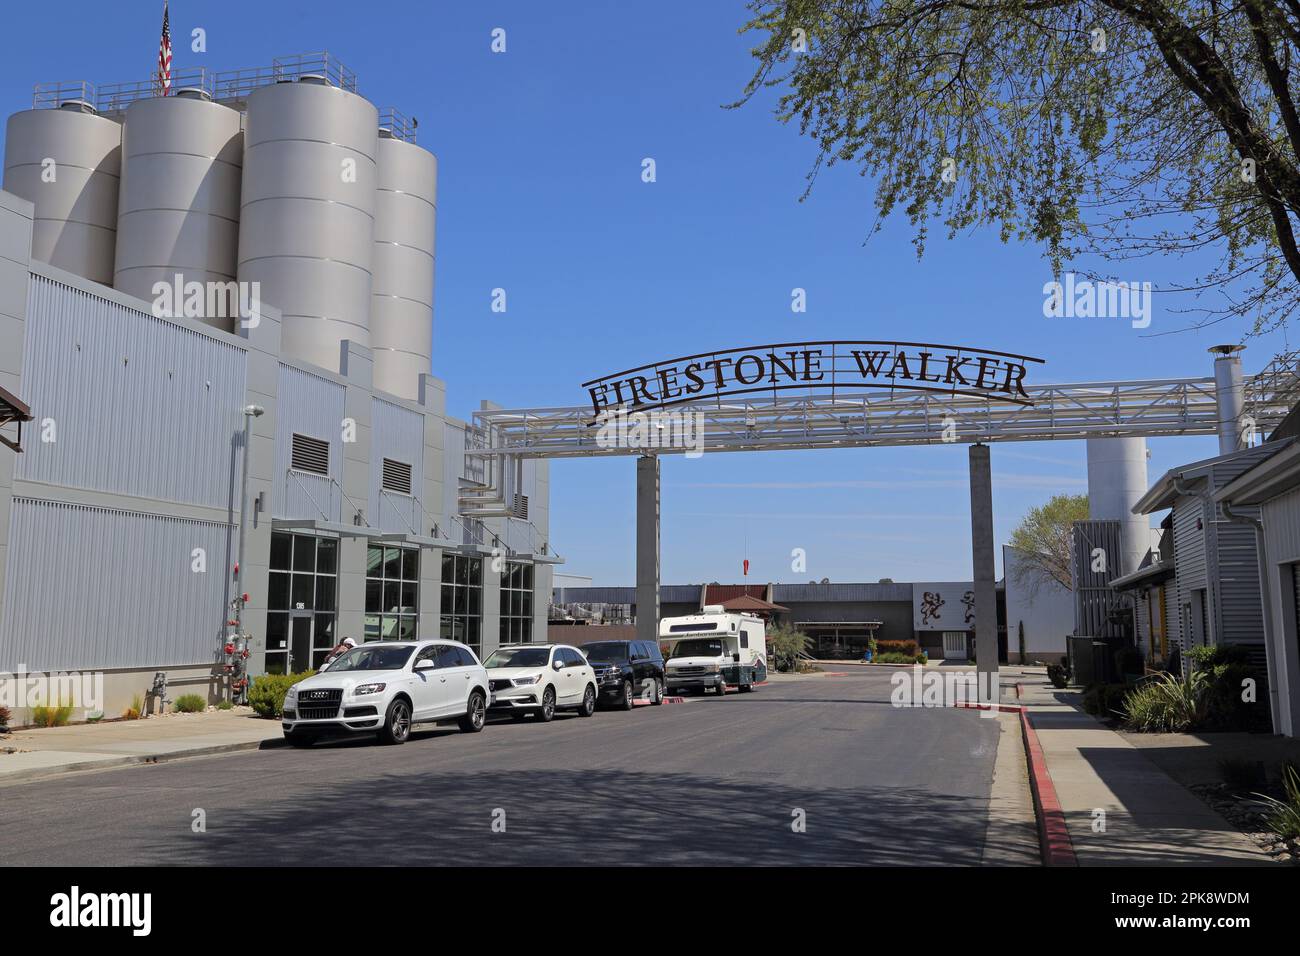 Paso Robles, California / USA - April 5, 2021: A Firestone Walker Brewing Company beer factory sign is shown during the day, next to the tasting room. Stock Photo